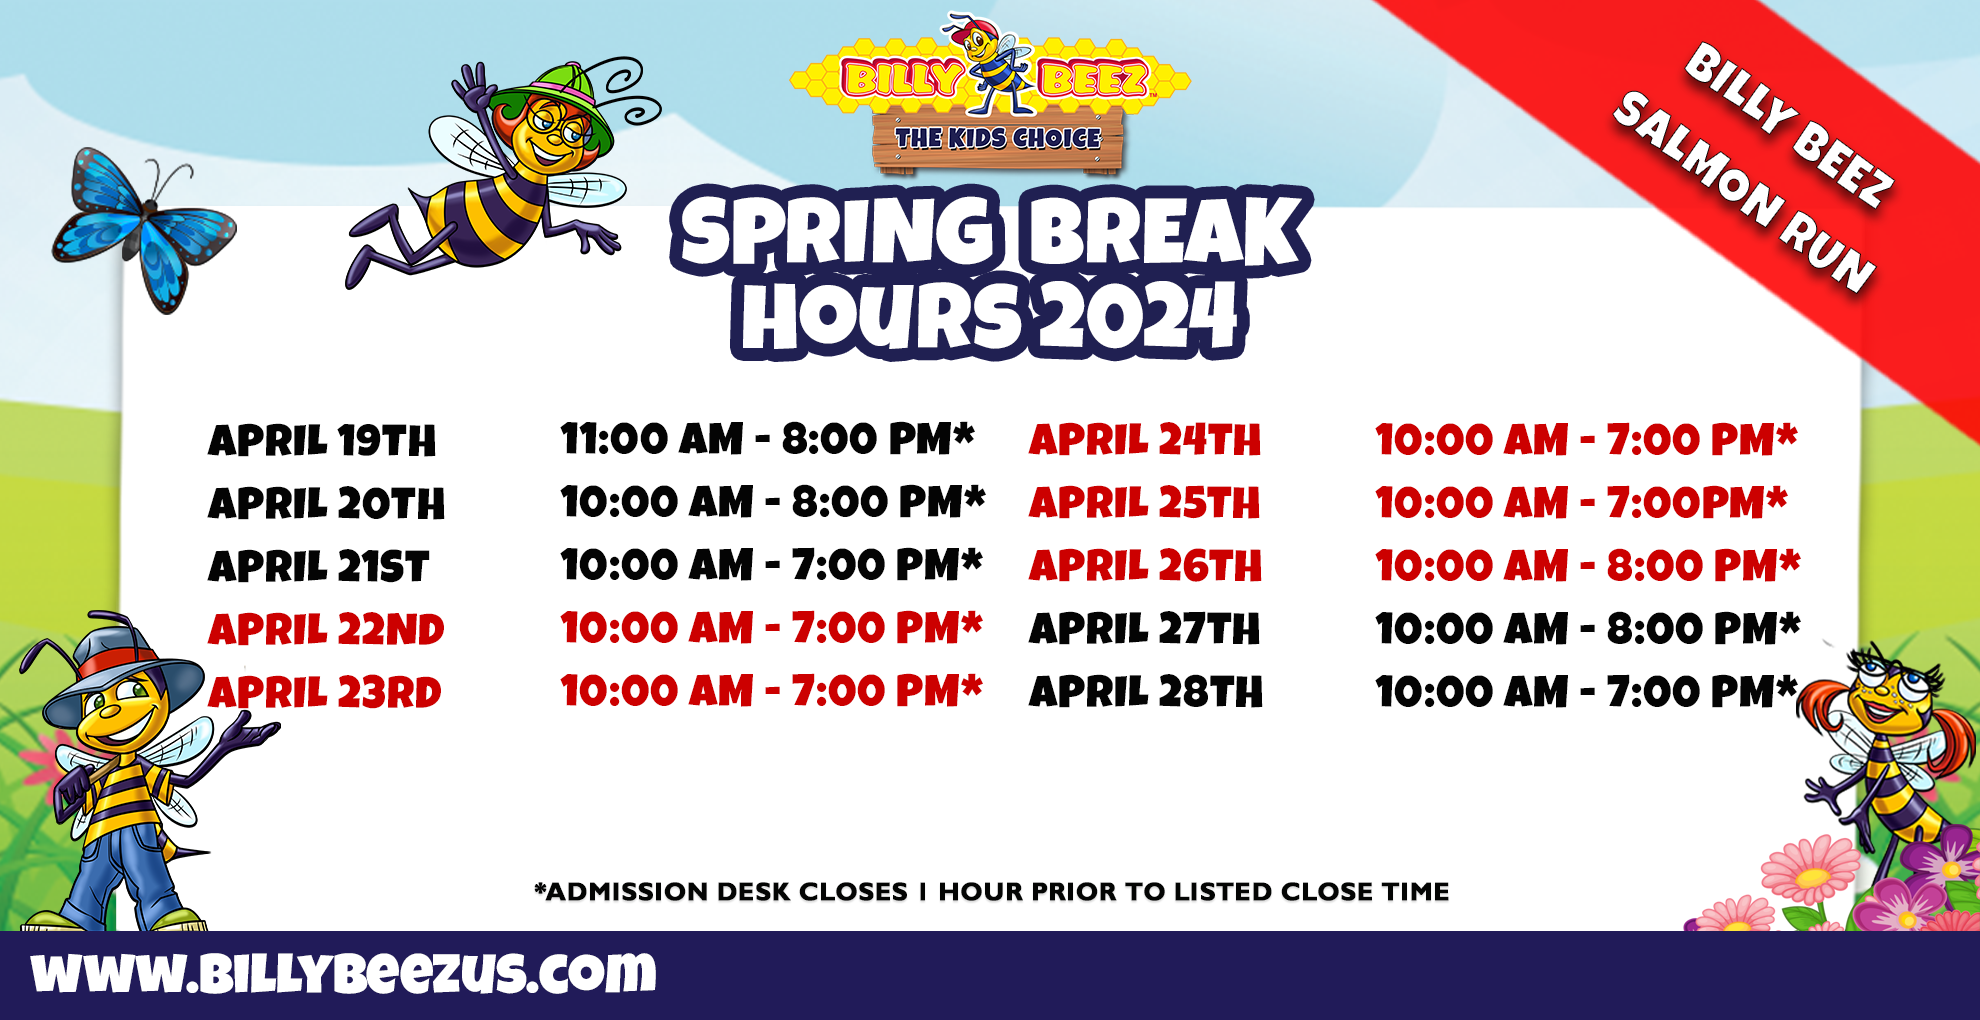 Billy Beez The Kids Place Billy Beez Salmon Run Spring Break Hours 2024 April 19th 11:00am-8:00am* April 20th 10:00am-8:00pm* April 21st 10:00am-7:00pm* April 22nd 10:00am-7:00pm* April 23rd 10:00am-7:00pm* April 24th 10:00am-7:00pm* April 25th 10:00am-7:00pm* April 26th 10:00am-8:00pm* April 27th 10:00am-8:00pm* April 28th 10:00am-7:00pm* *Admission desk closes 1 hour prior to listed close time